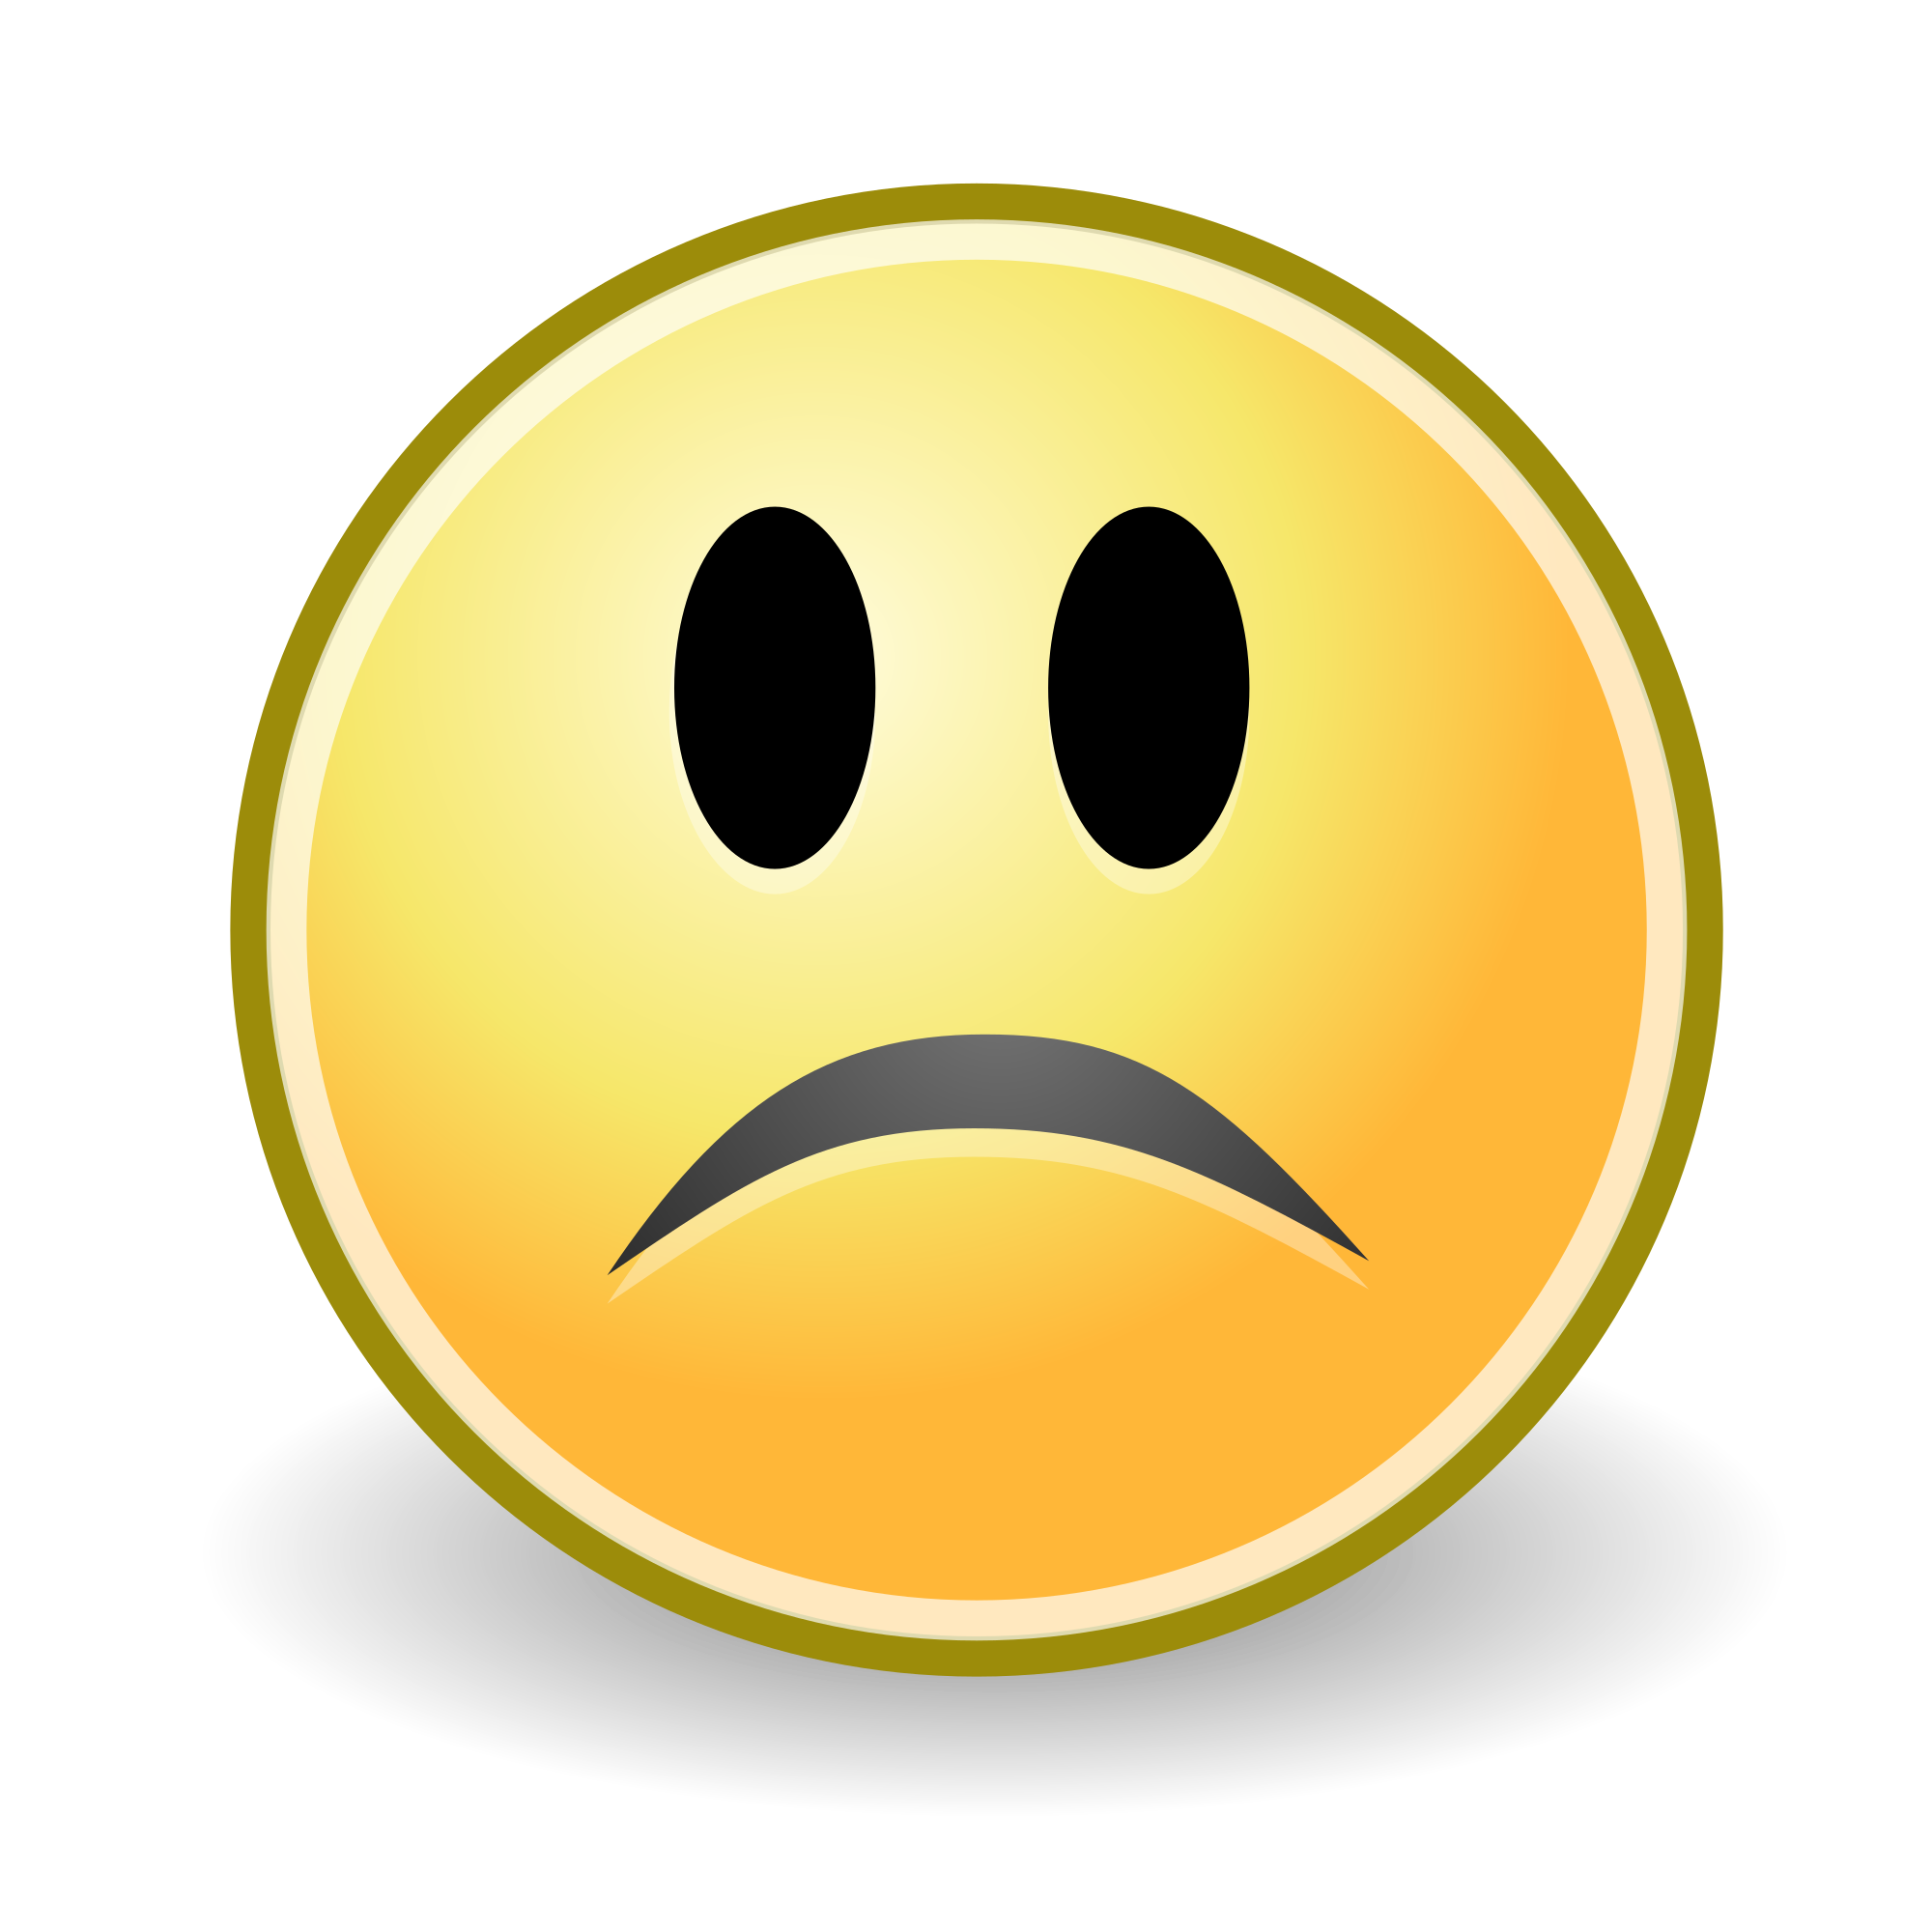 Gallery picture of sad. Smiley face clip art professional